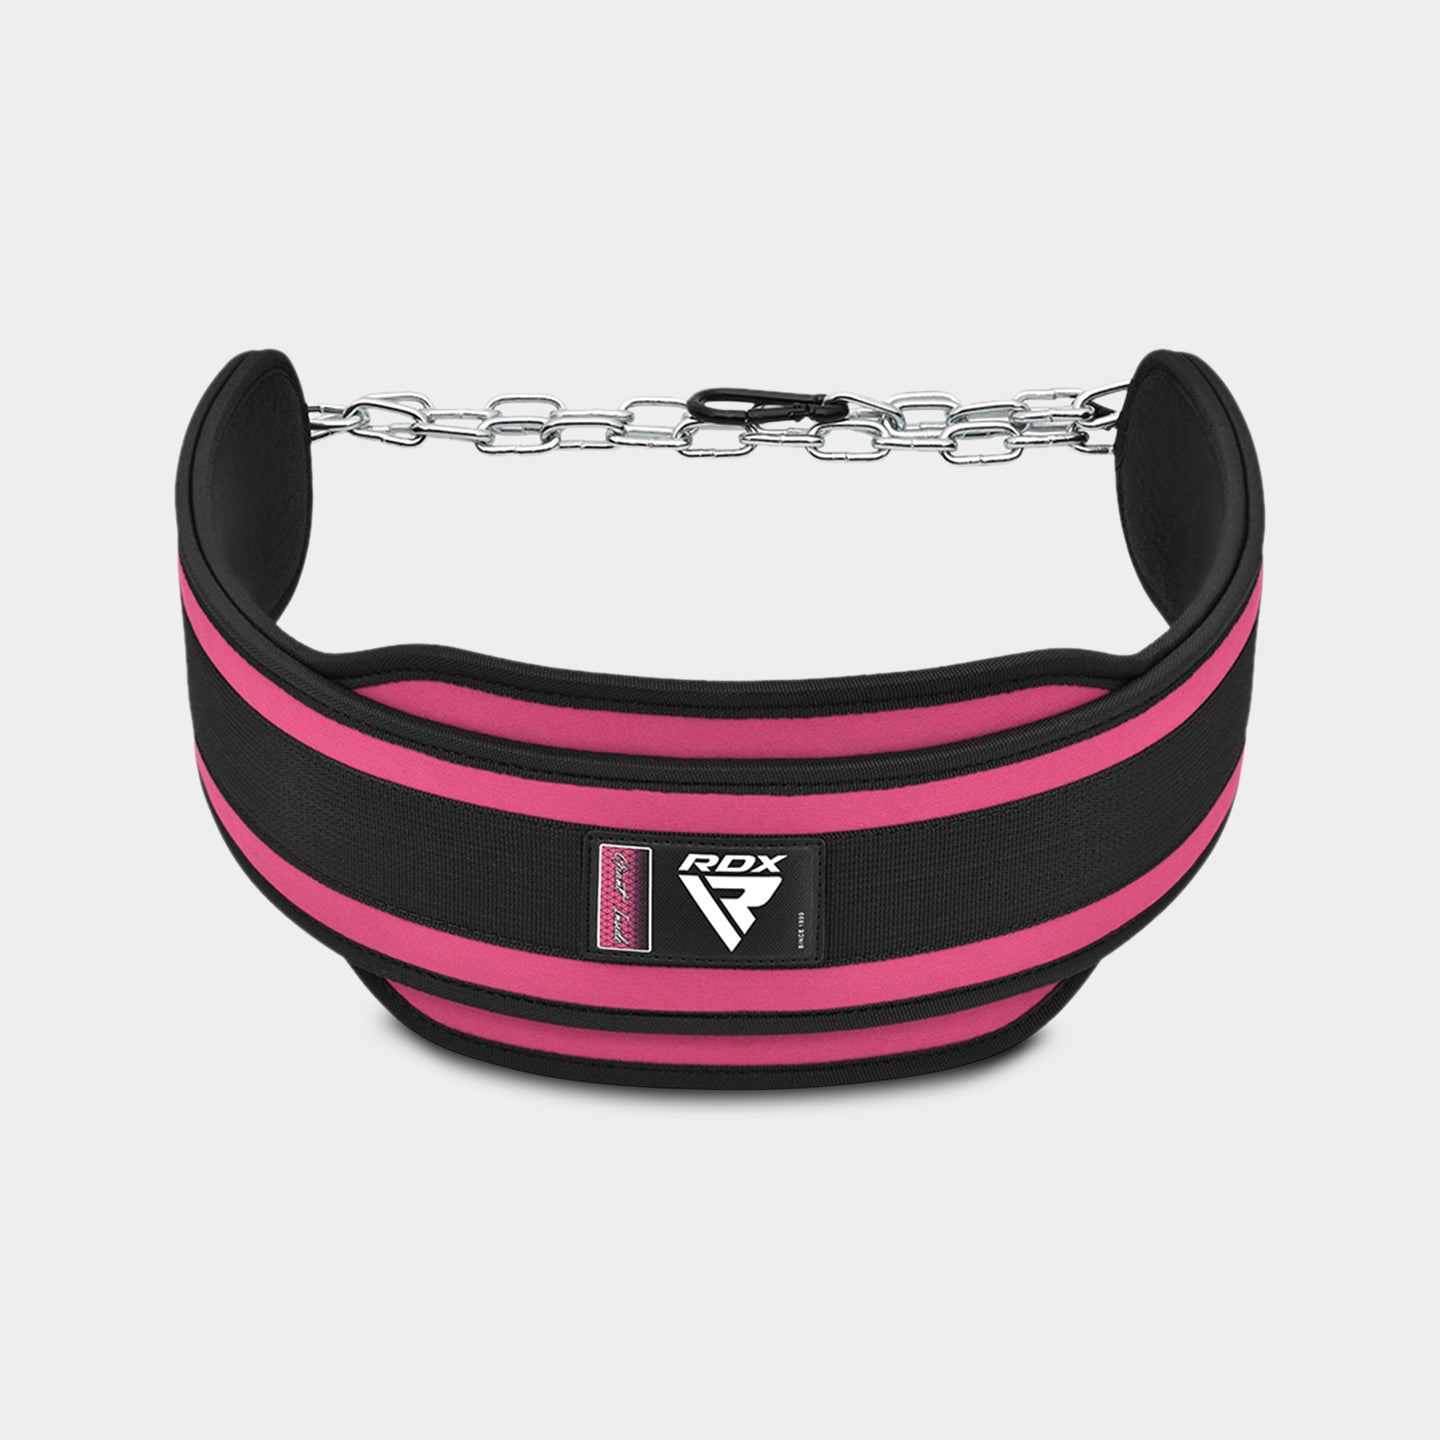 RDX Sports T7 Weight Training Dipping Belt With Chain, Standard Size, Sharp Pink A1